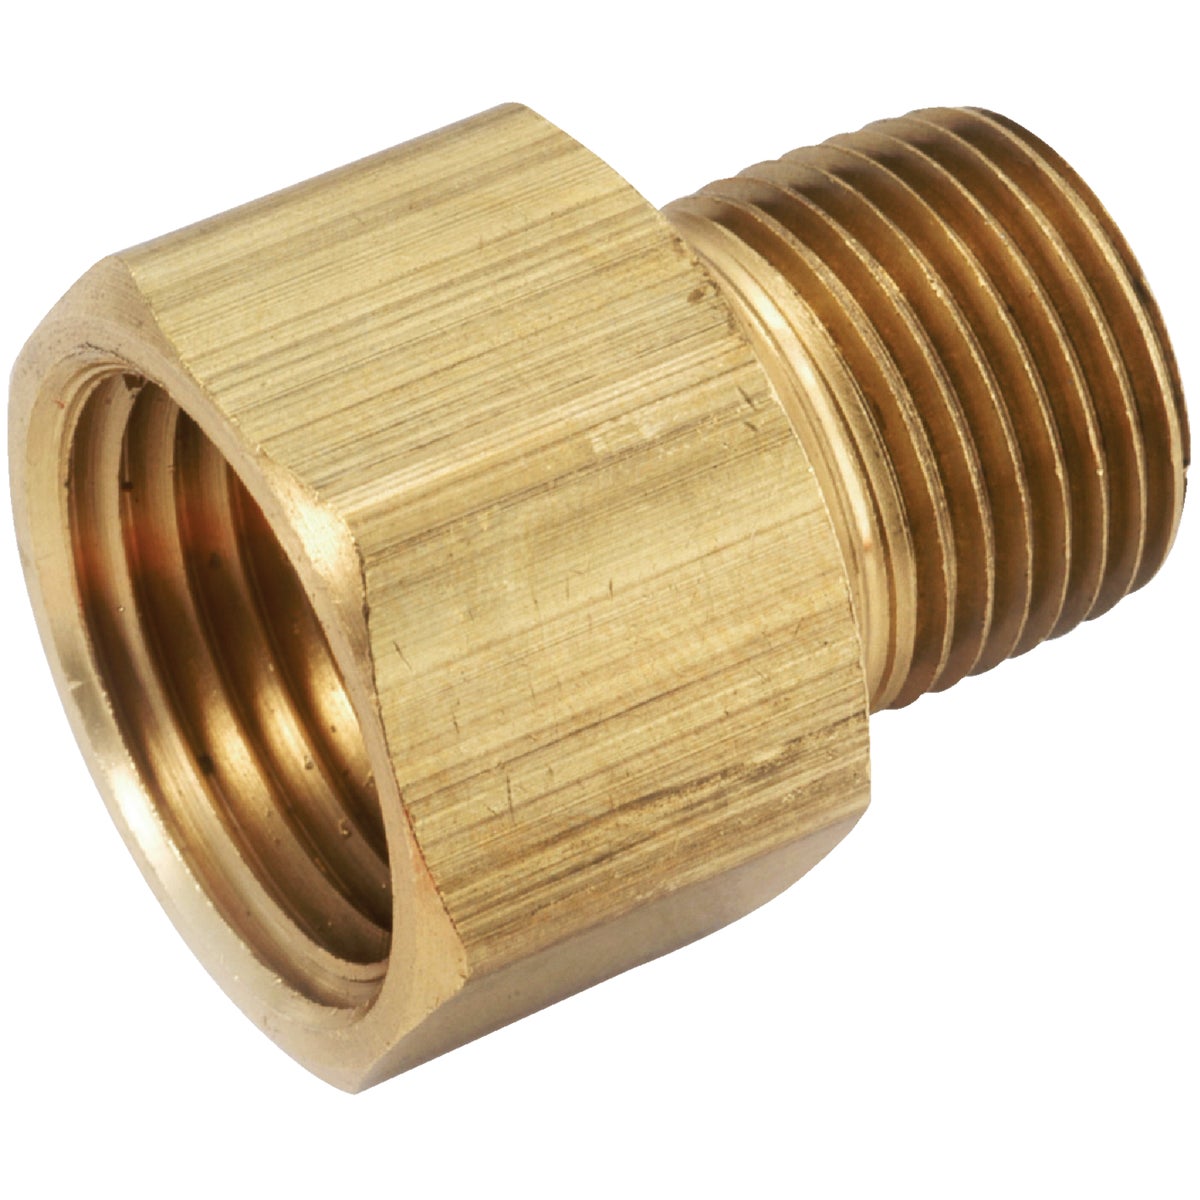 Anderson Metals 3/8 In. FPT x 3/8 In. MPT Brass Adapter